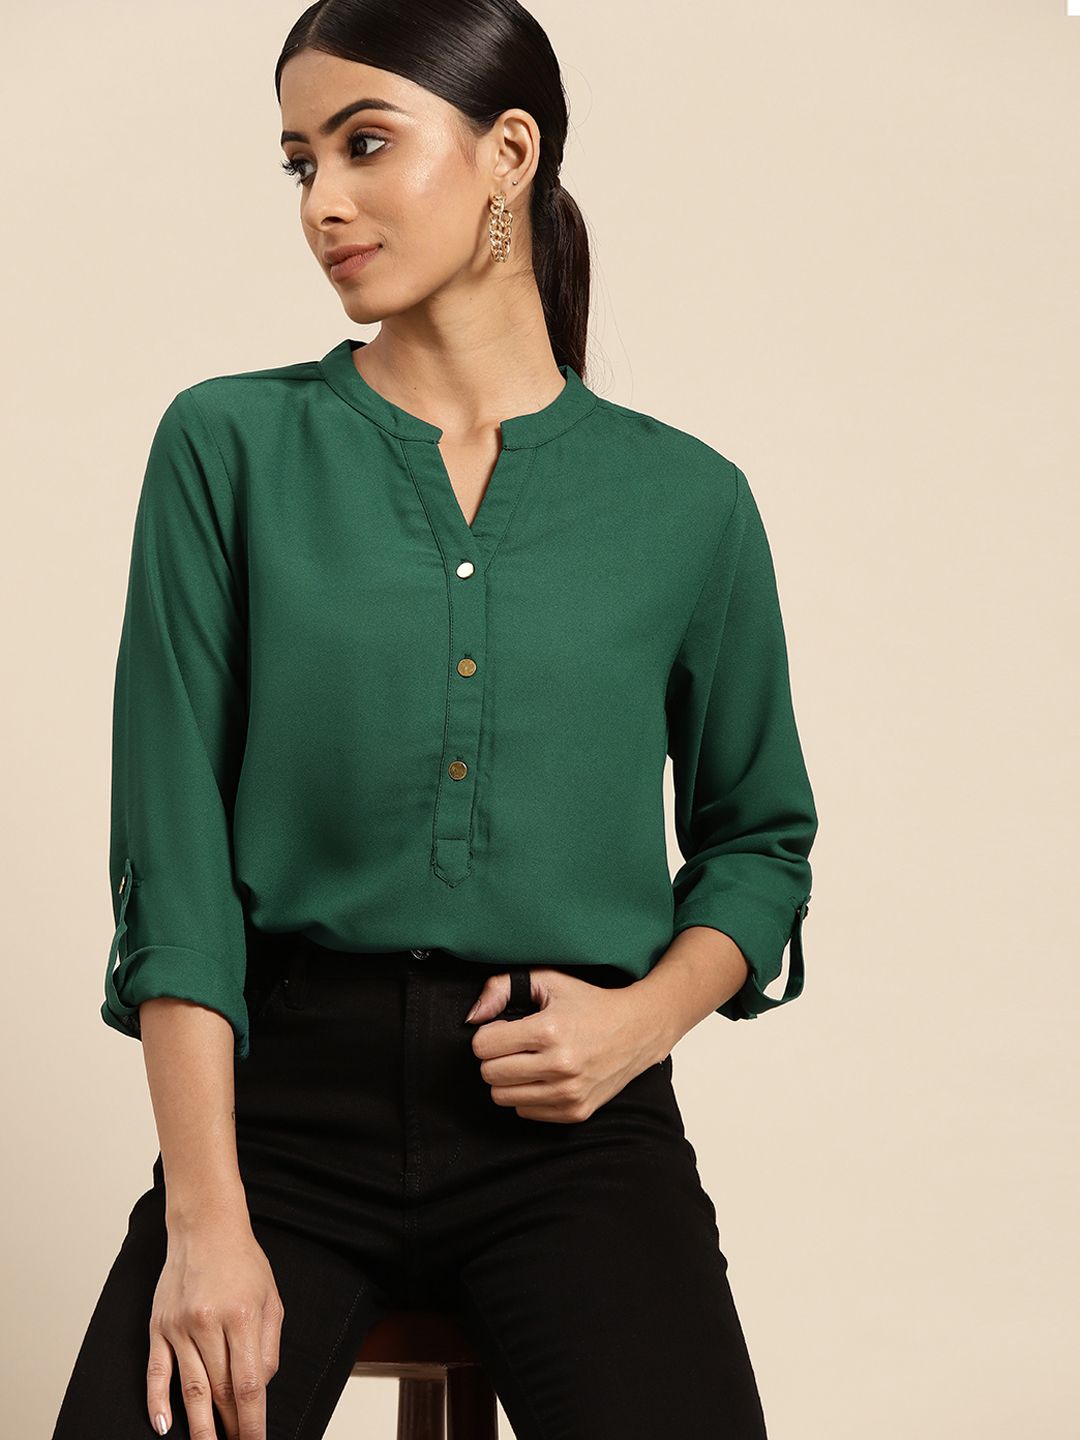 all about you Women Green Solid Shirt Style Top Price in India